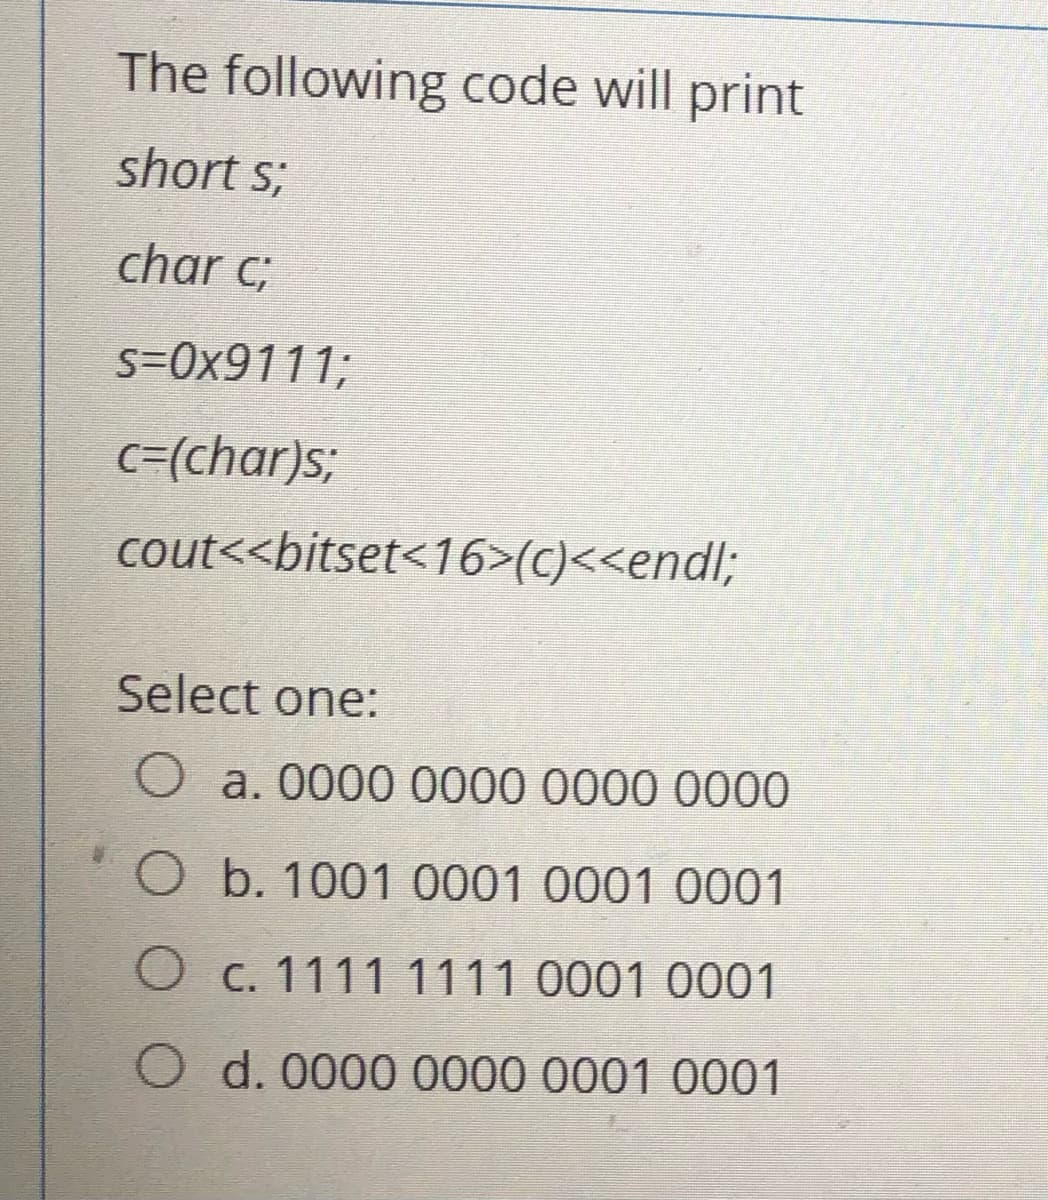 The following code will print
short s;
char c;
s=0x9111;
c=(char)s;
cout<<bitset<16>(c)<<endl;
Select one:
O a. 0000 0000 0000 0000
O b. 1001 0001 0001 0001
O c. 1111 1111 0001 0001
d. 0000 0000 0001 0001
